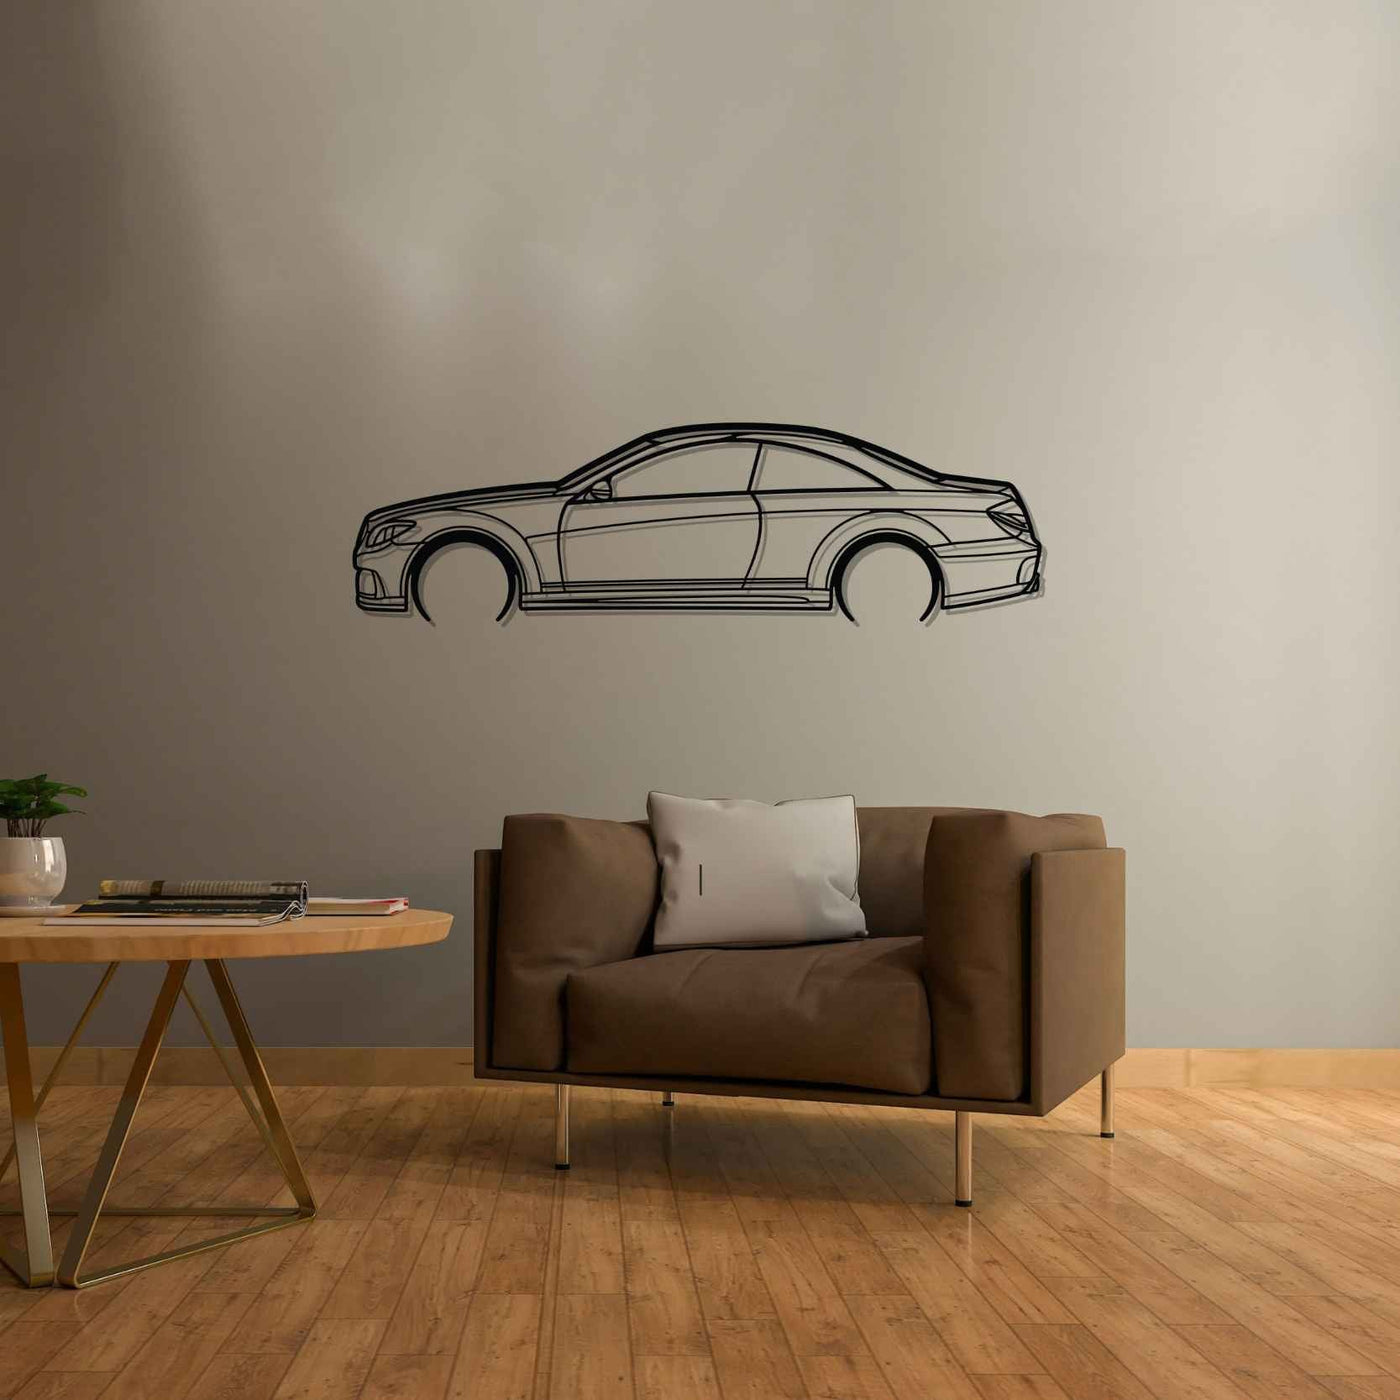 CL 500 Detailed Silhouette Metal Wall Art